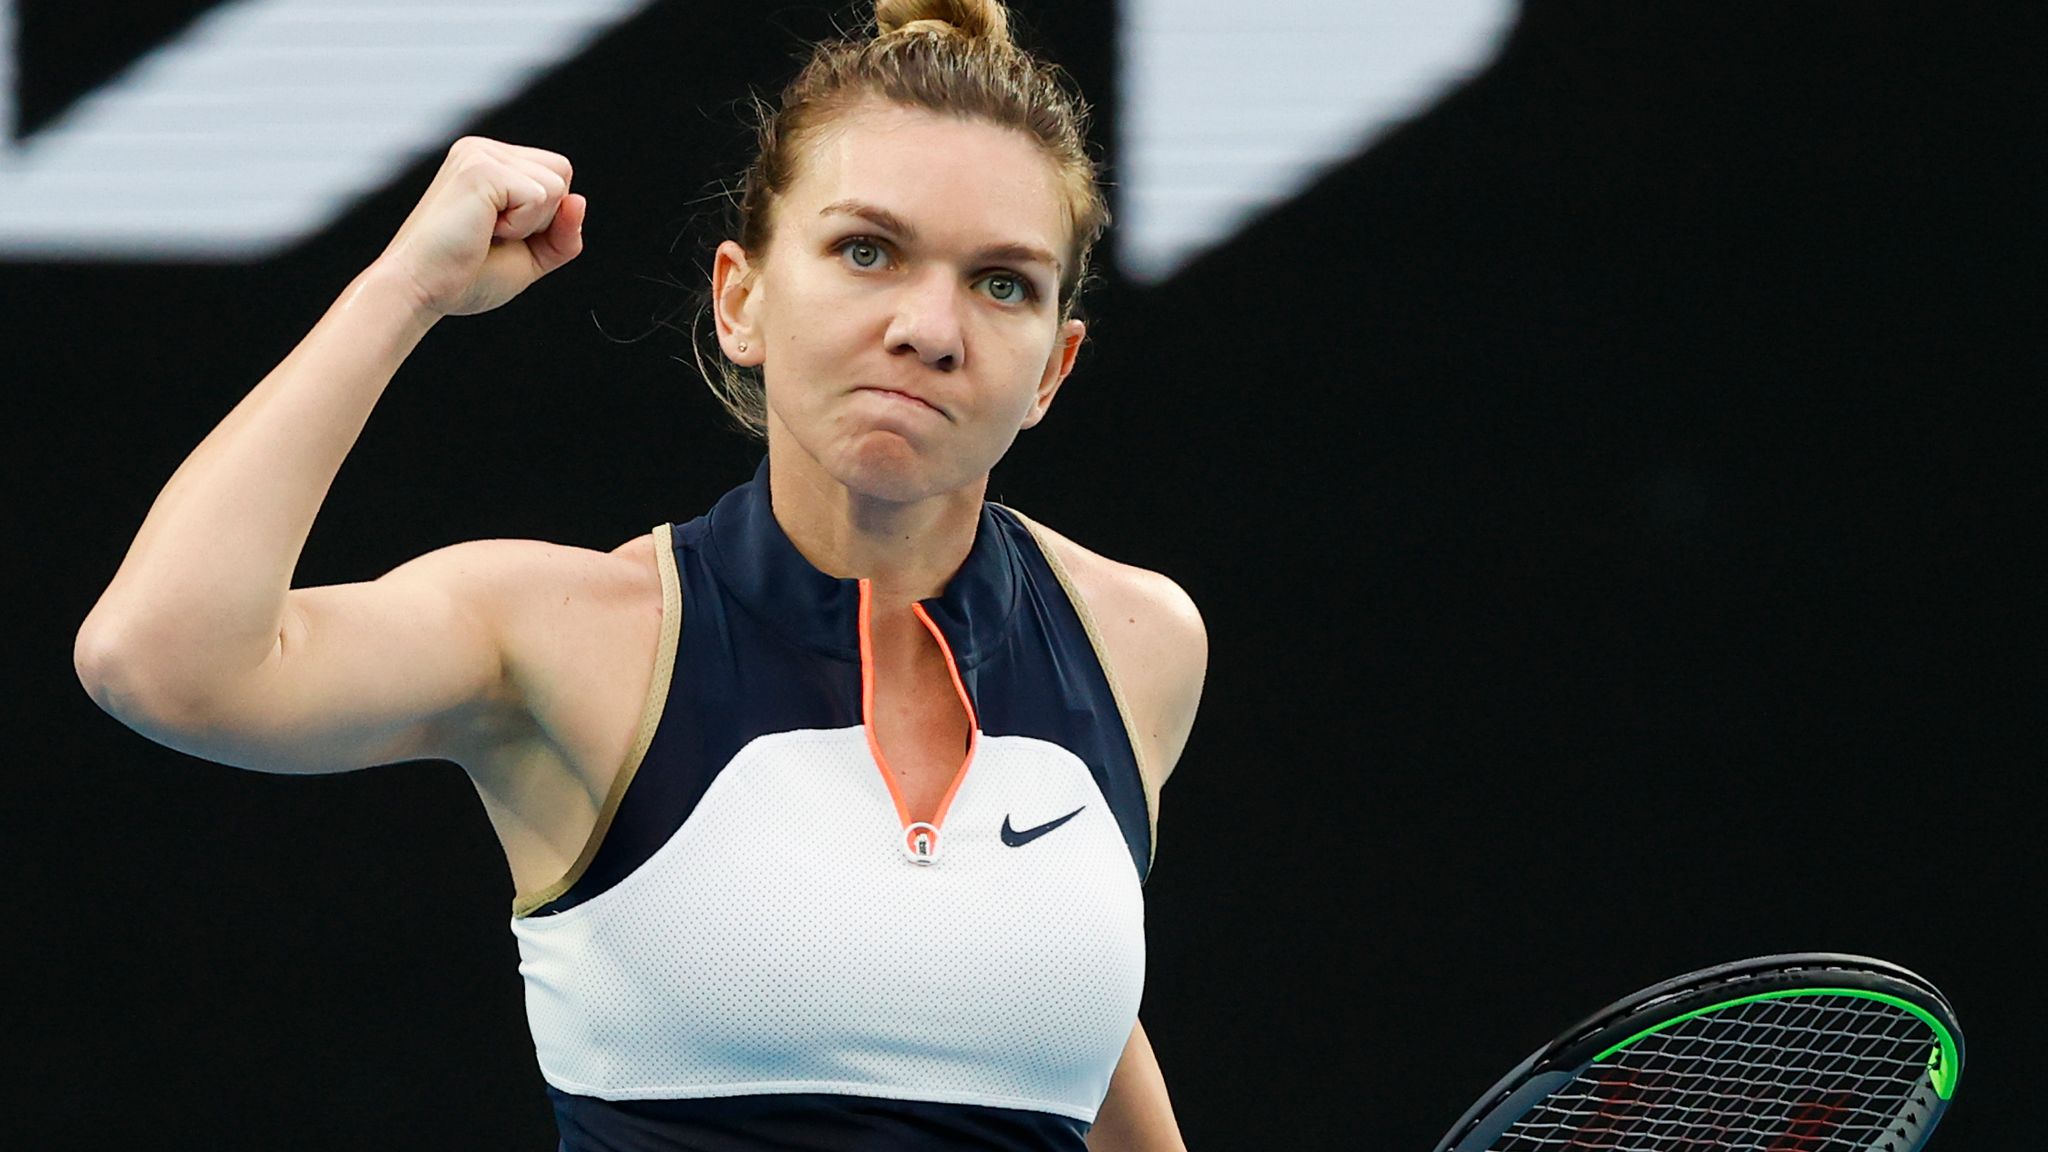 Wimbledon Defending champion Simona Halep recovers from injury and on track for Grand Slam Tennis News Sky Sports